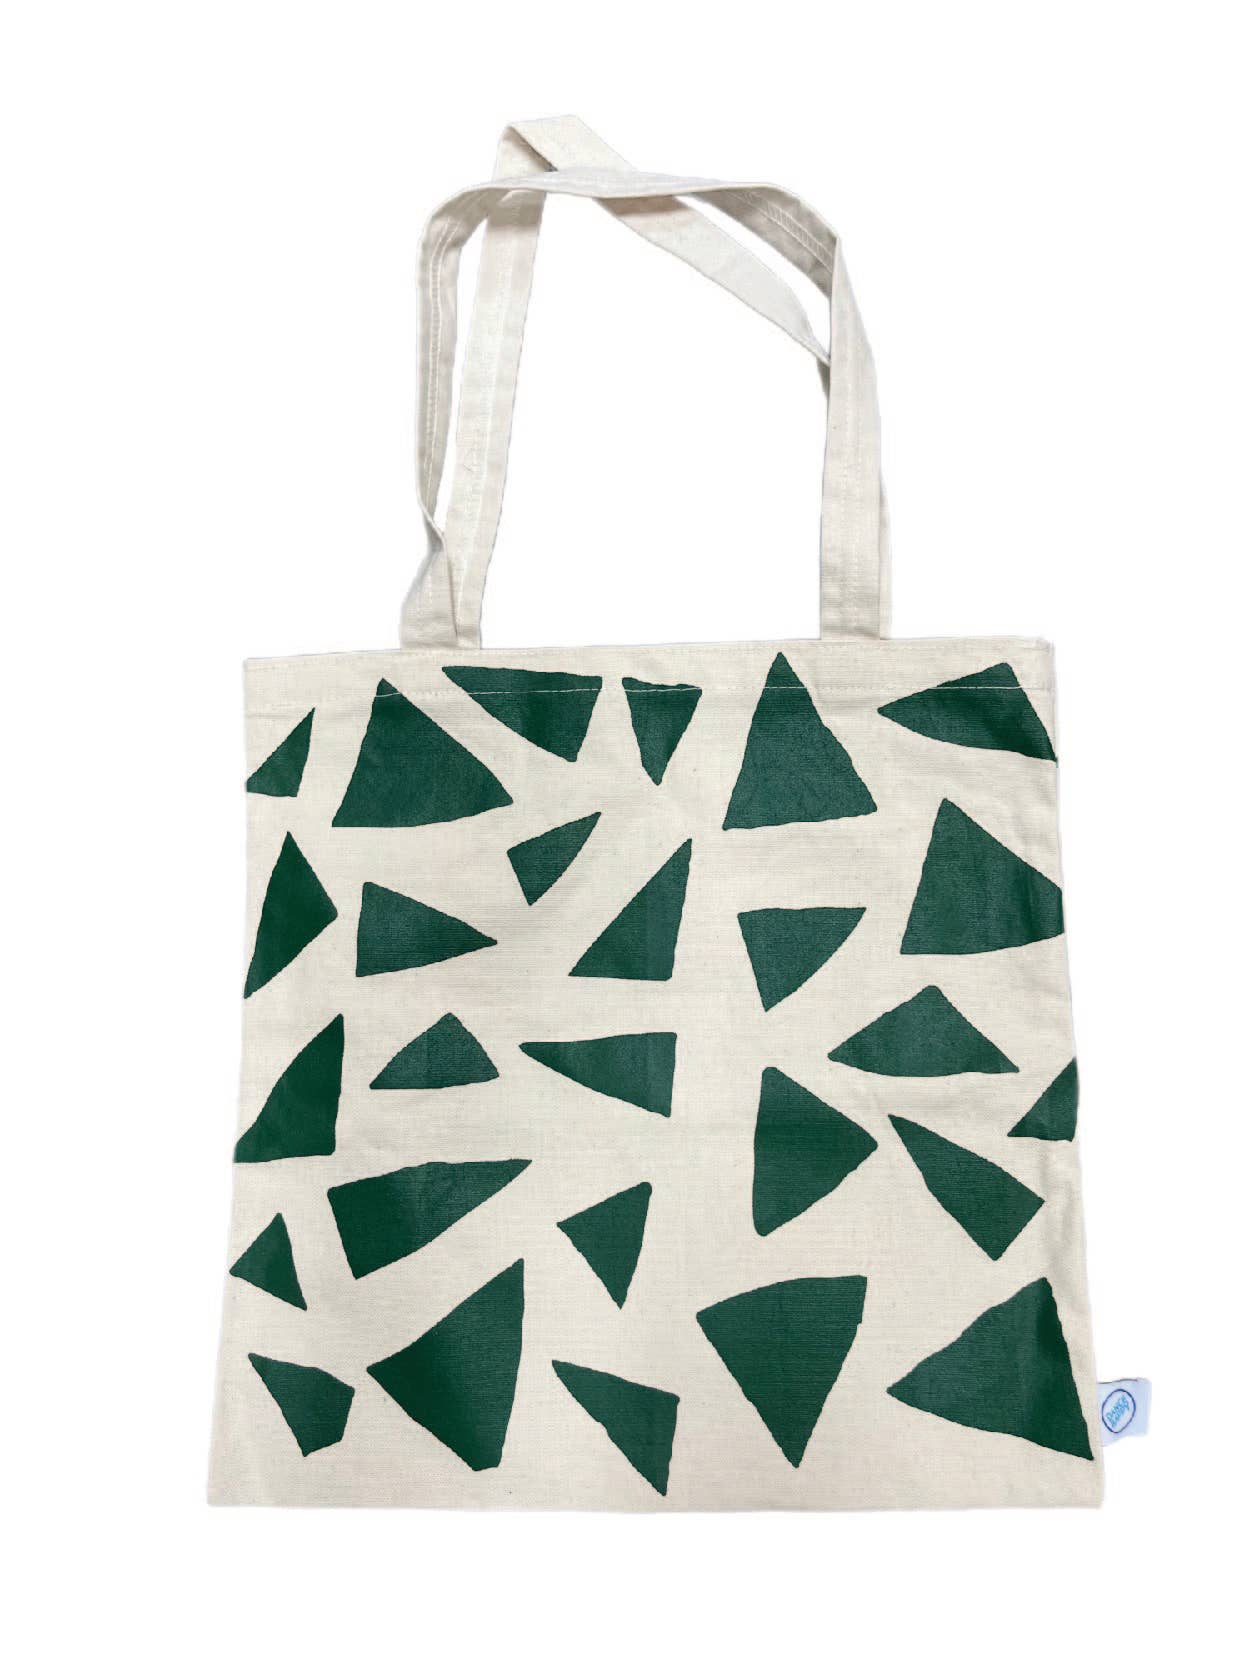 Fair Trade flat tote (Large Triangles) - Evergreen